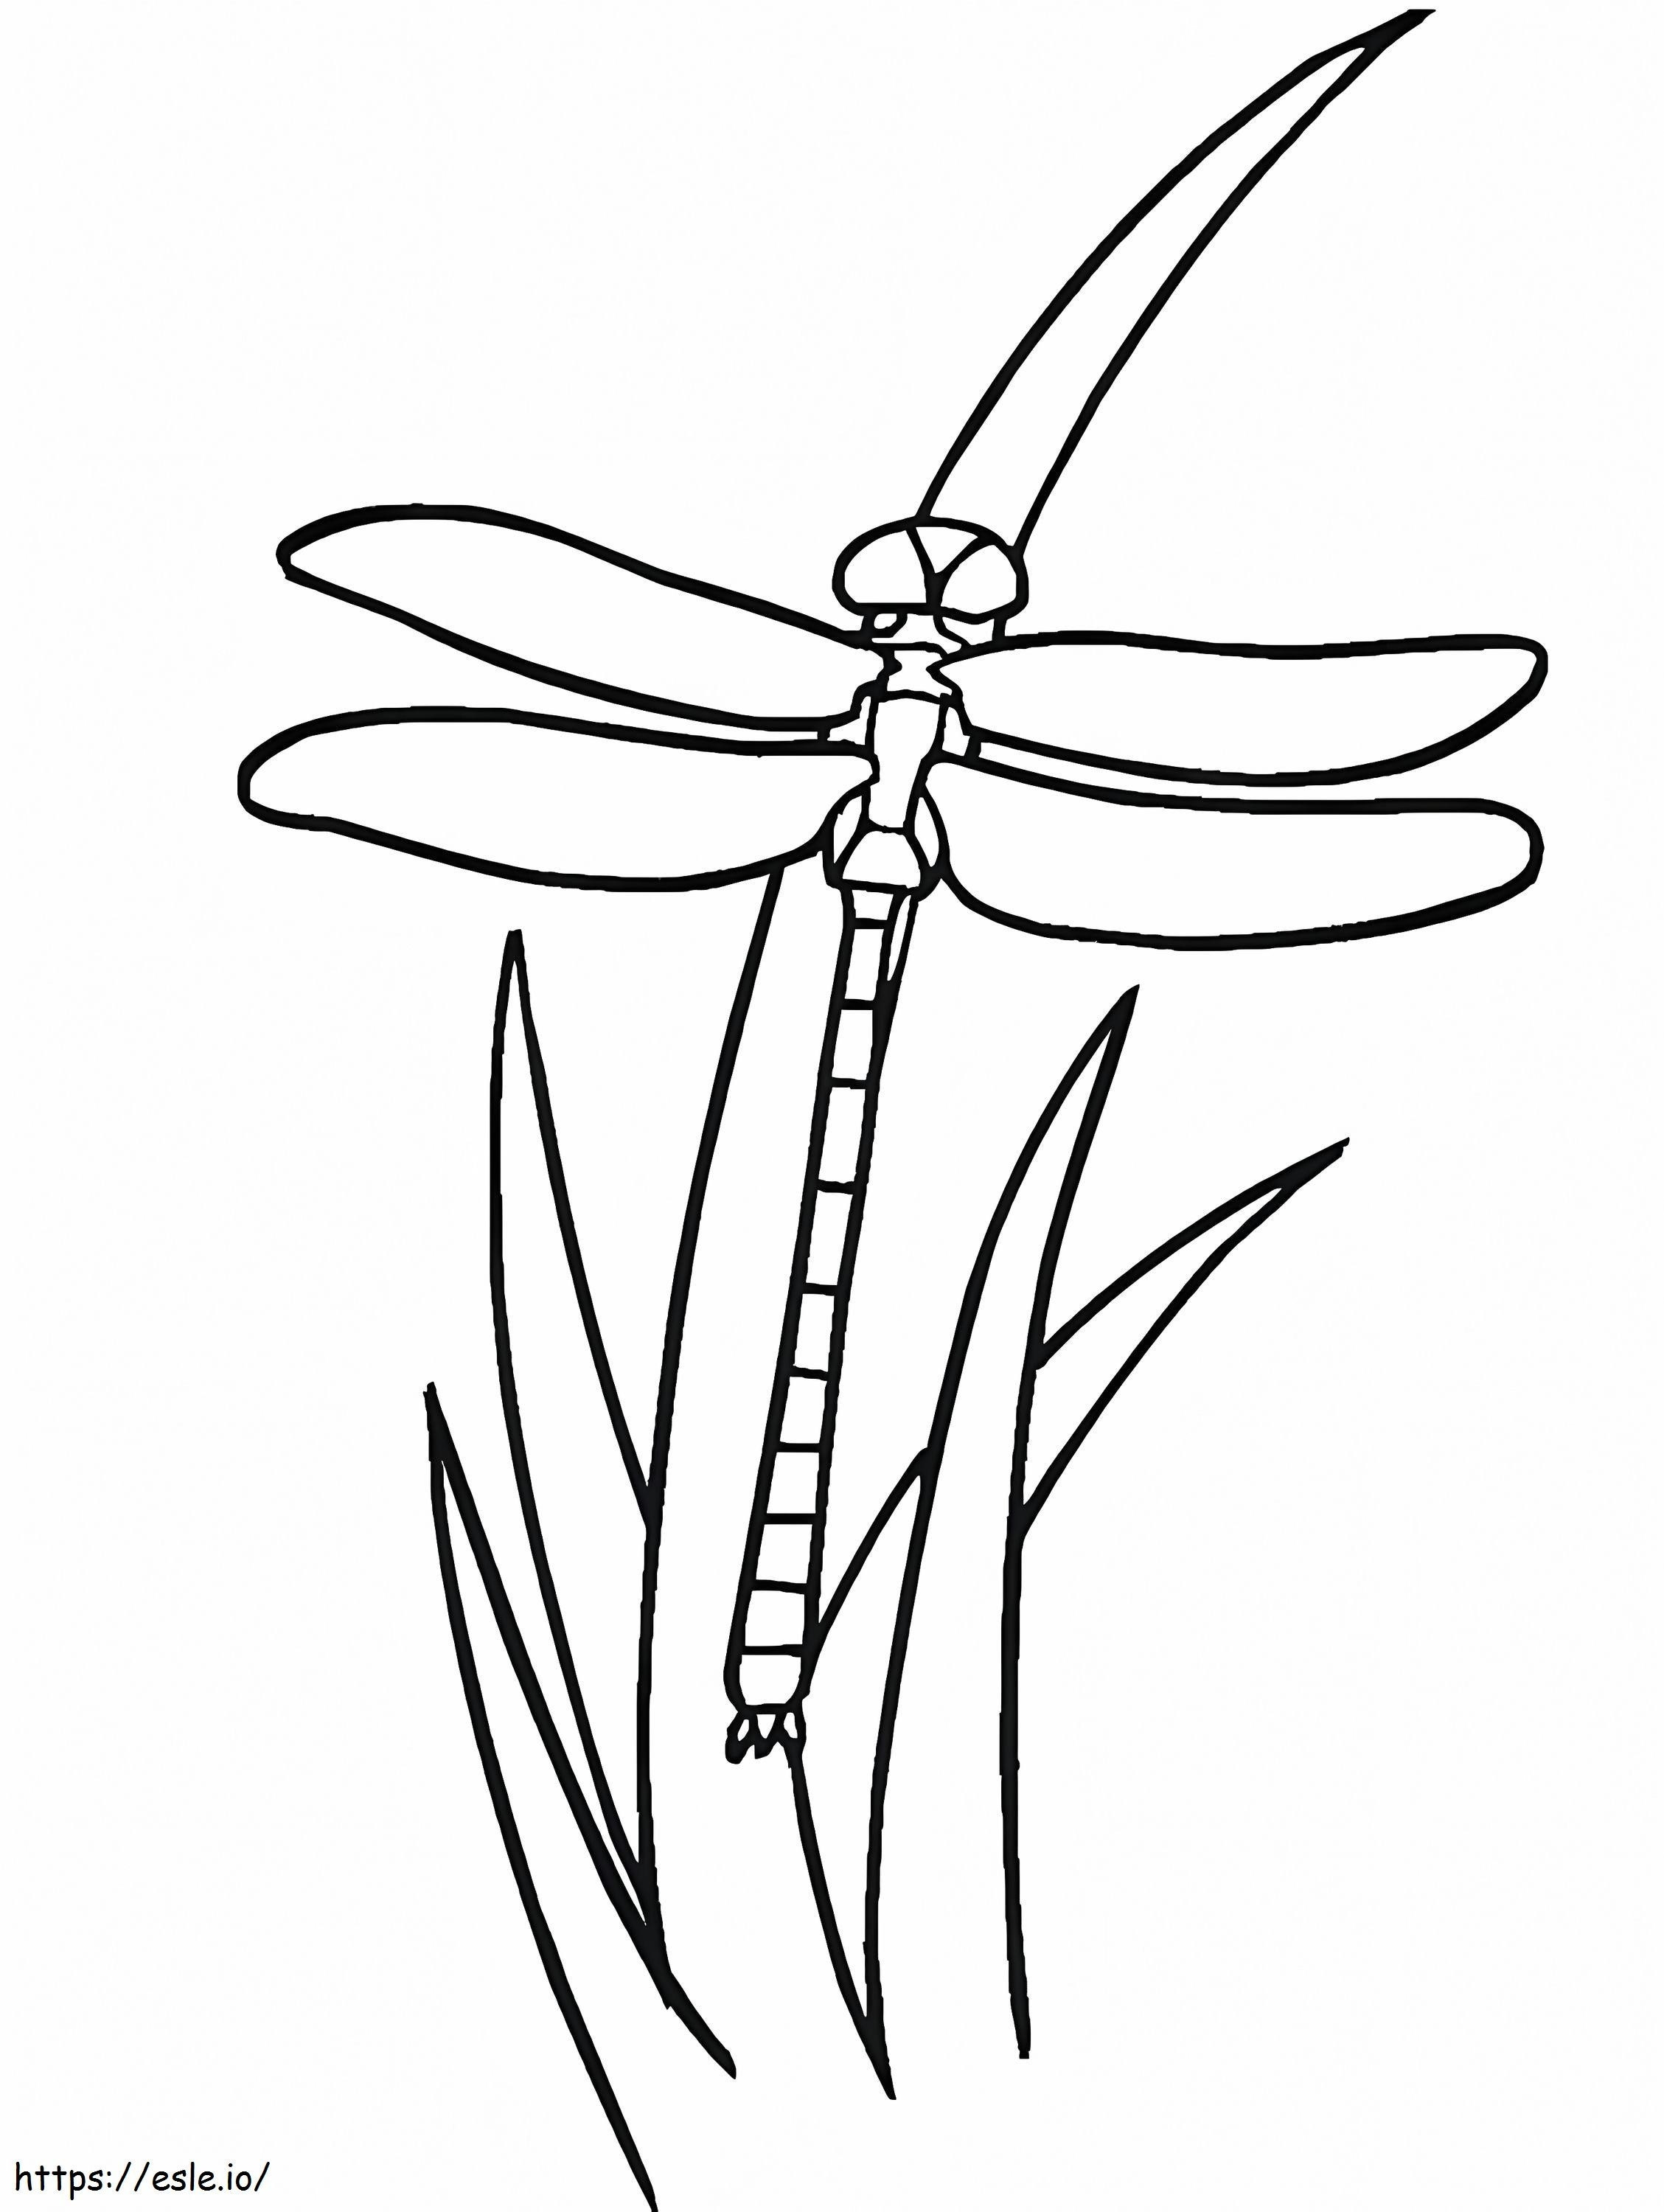 Dragonfly On Grass coloring page